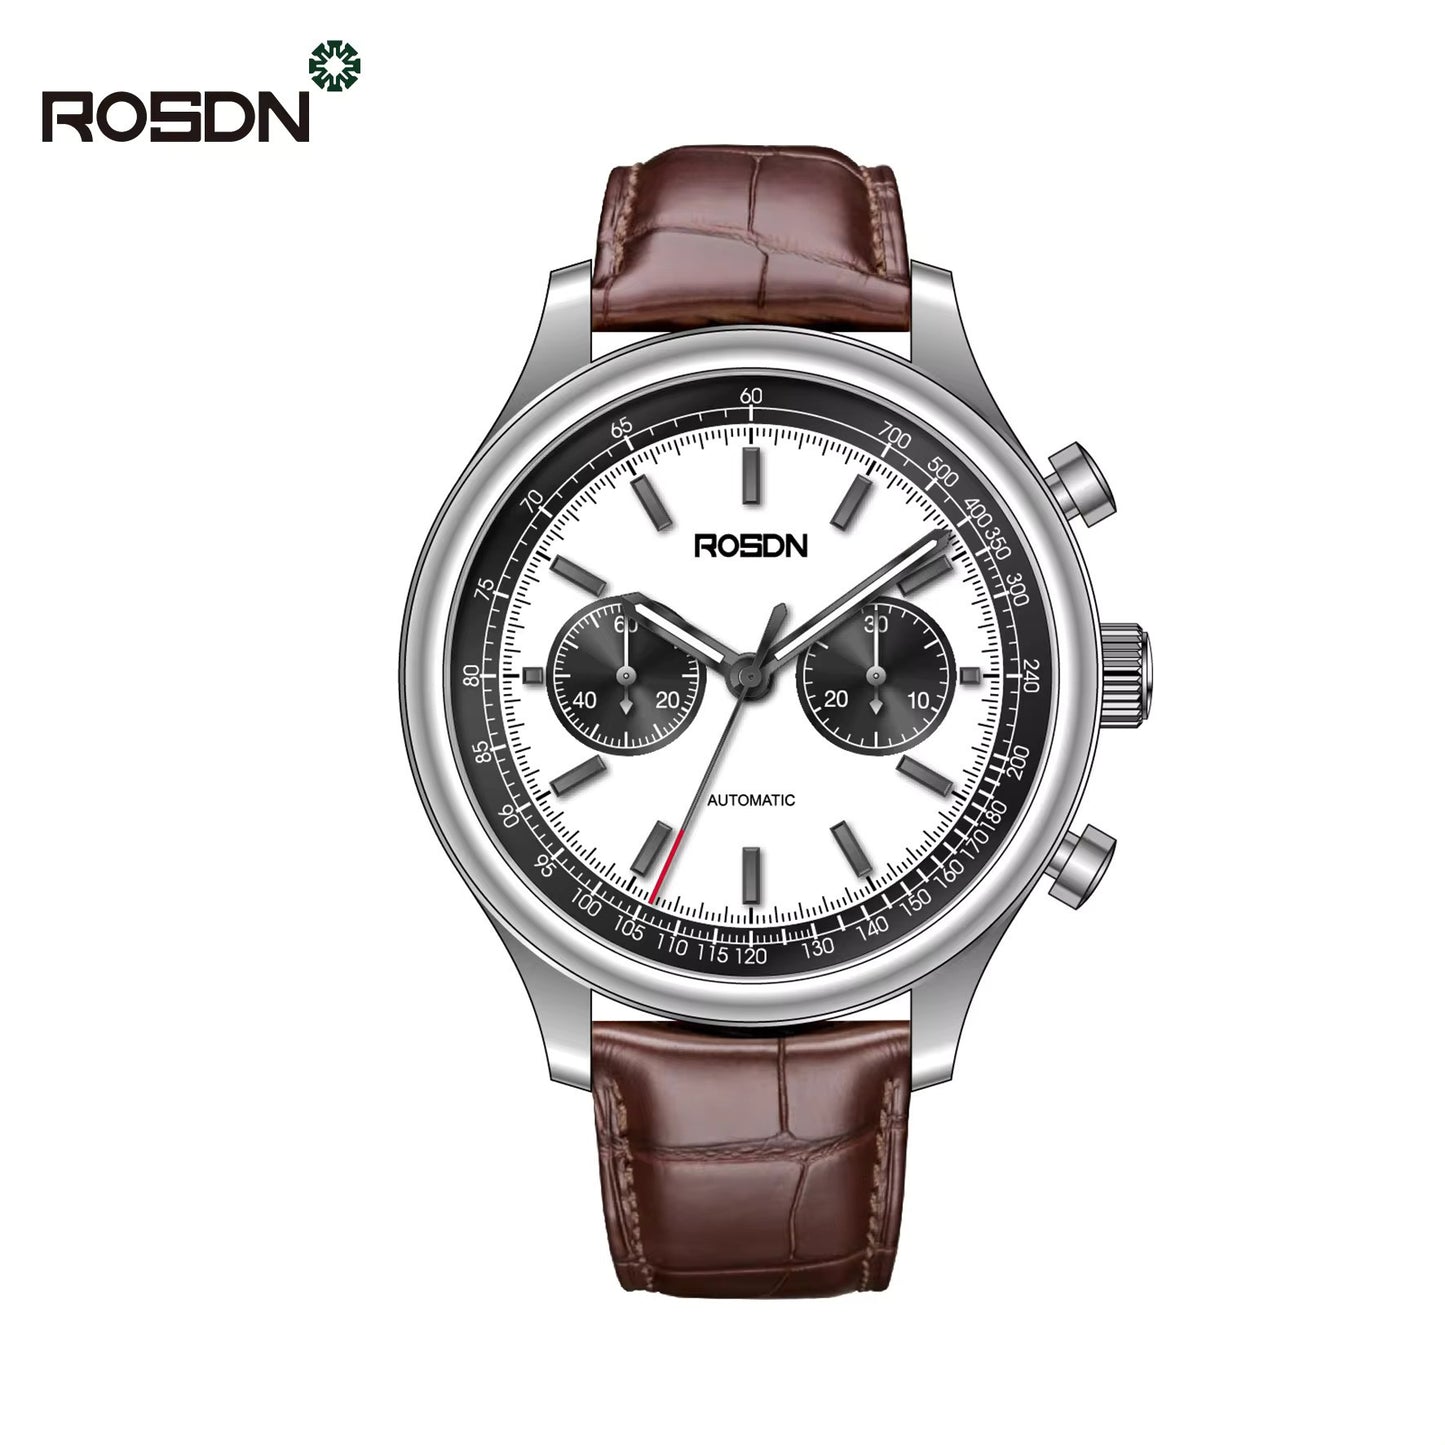 Future Wrist Men's Automatic Quartz Watch with Chronograph and Genuine Leather Strap